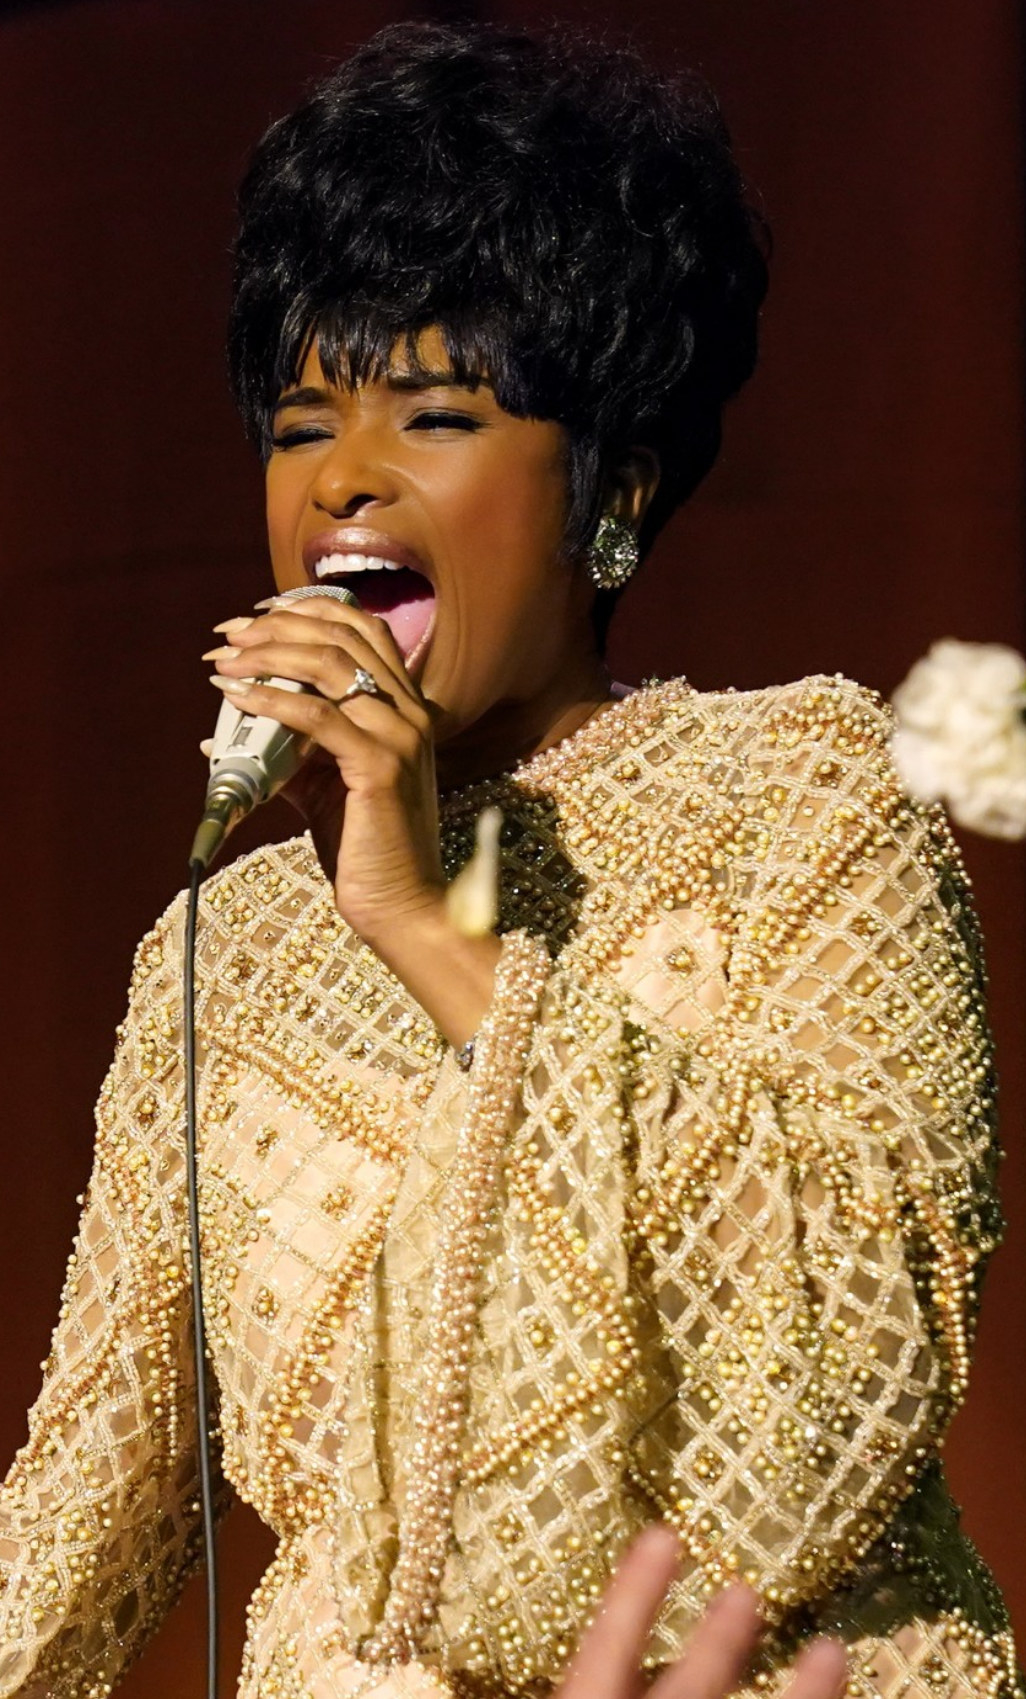 Hudson wearing long, beaded dress while performing as Franklin